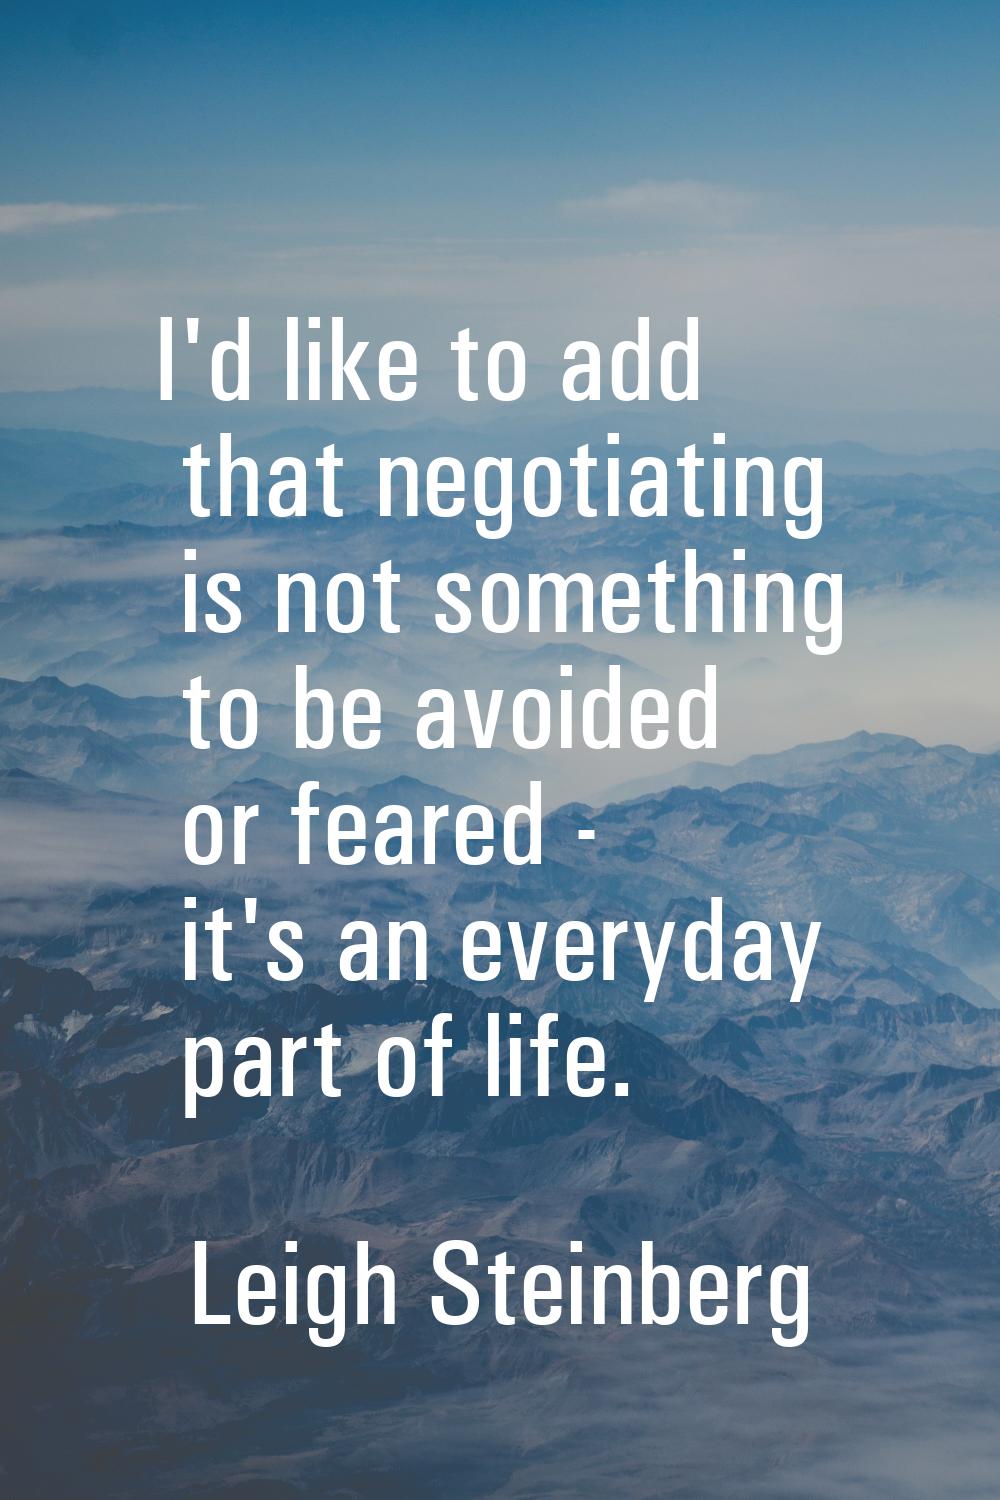 I'd like to add that negotiating is not something to be avoided or feared - it's an everyday part o